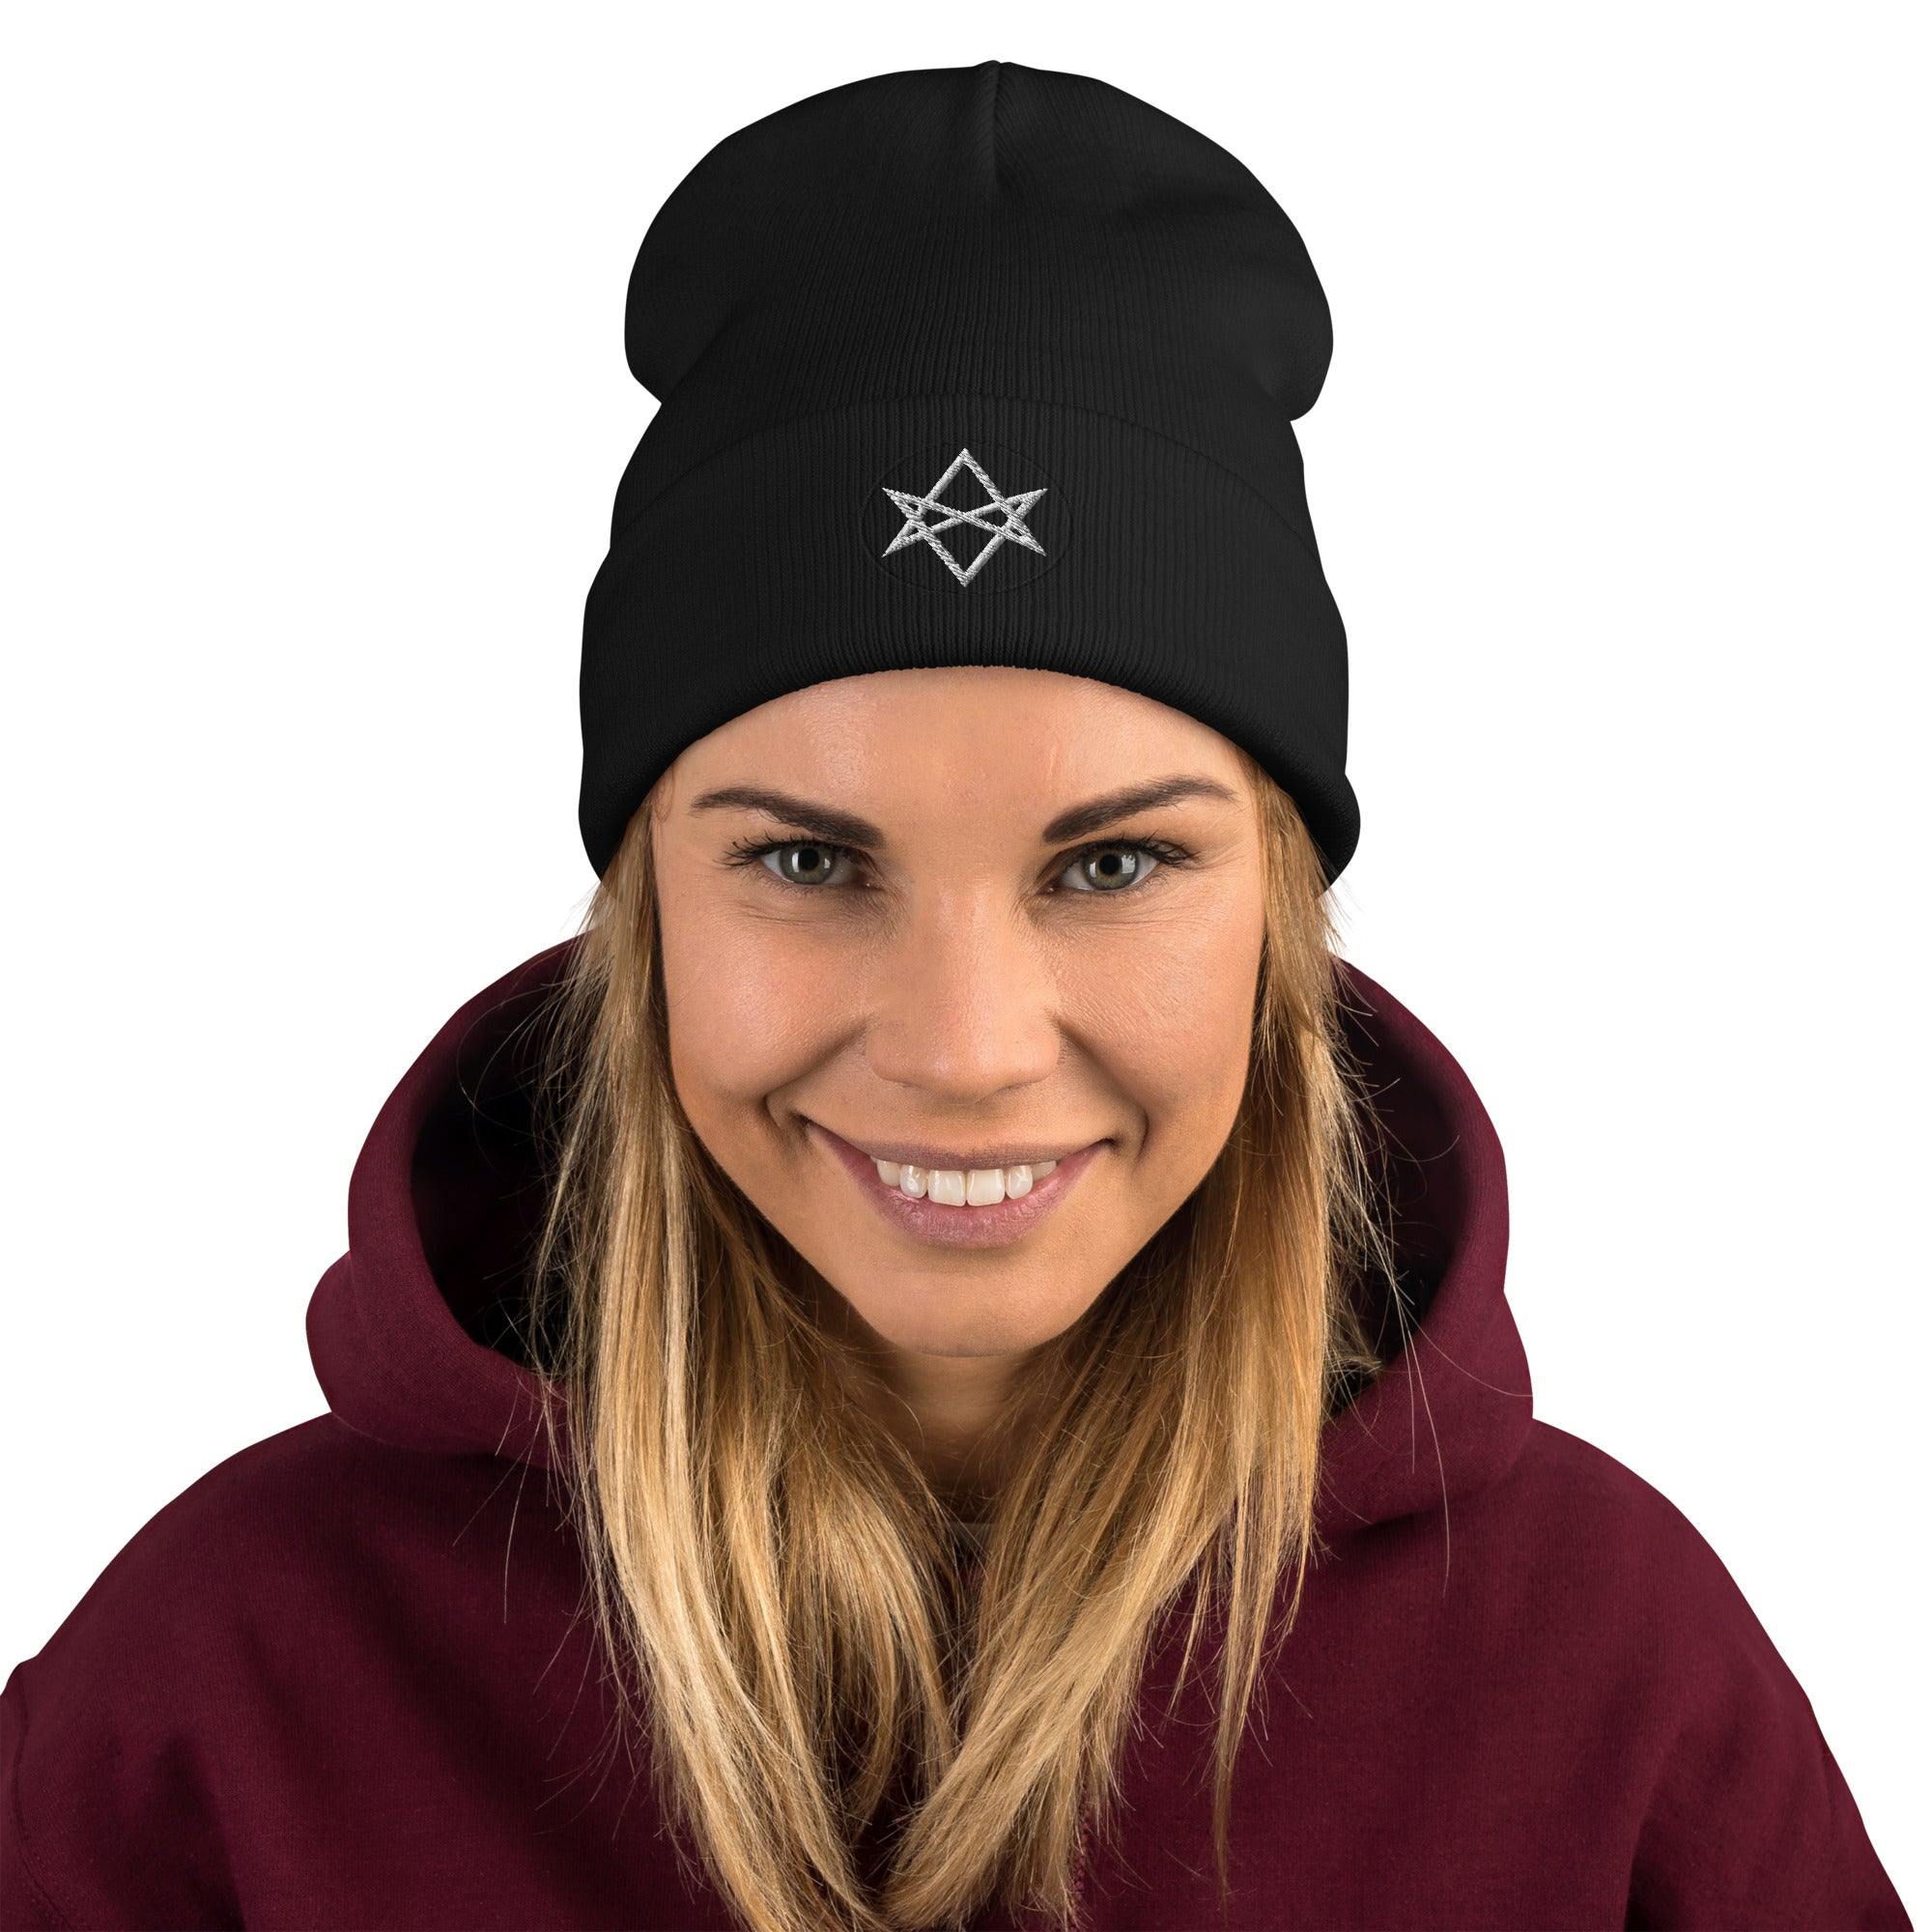 Unicursal Hexagram Six Pointed Star Occult Symbol Embroidered Cuff Beanie - Edge of Life Designs